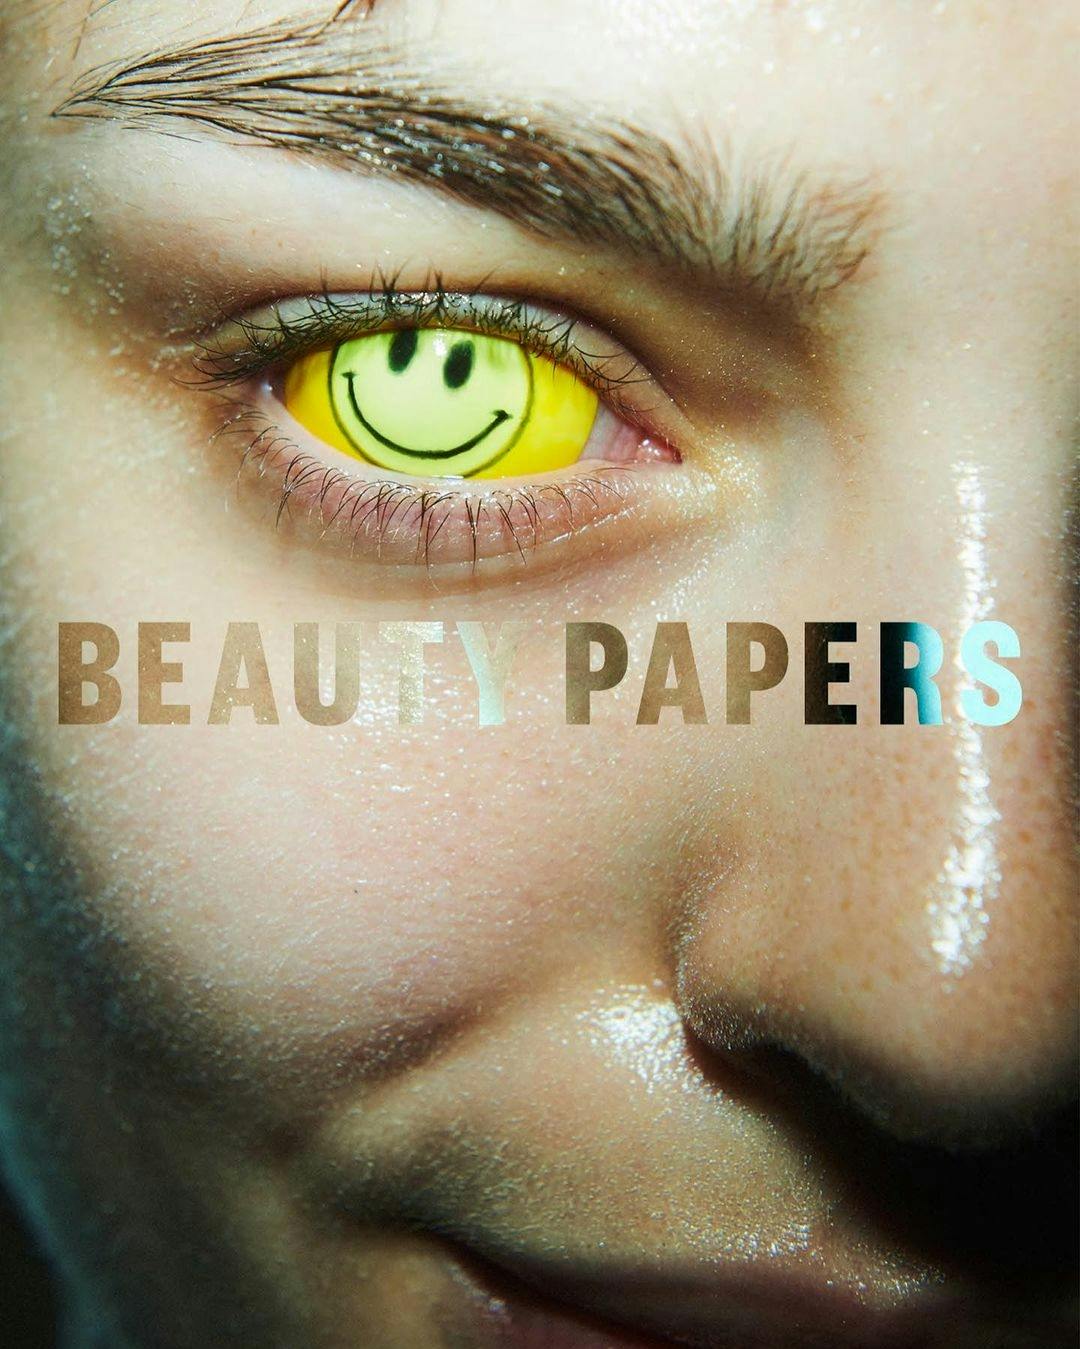  Beauty Papers, by Drew Vickers & Sam Visser